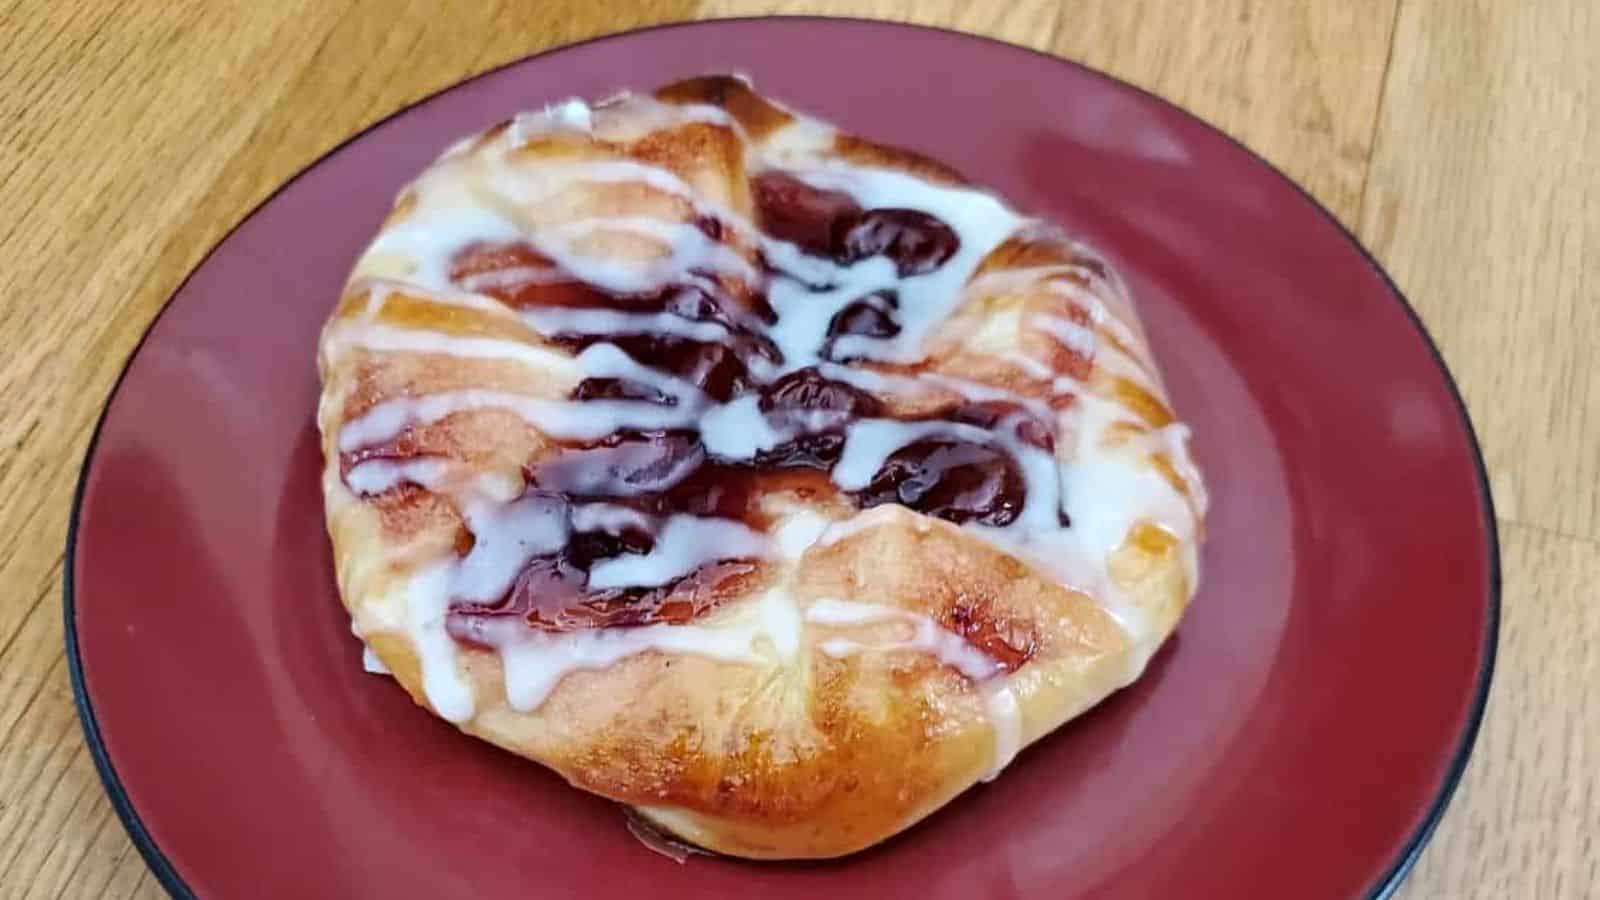 Image shows a close up of a Crescent Roll Danish on a red plate.